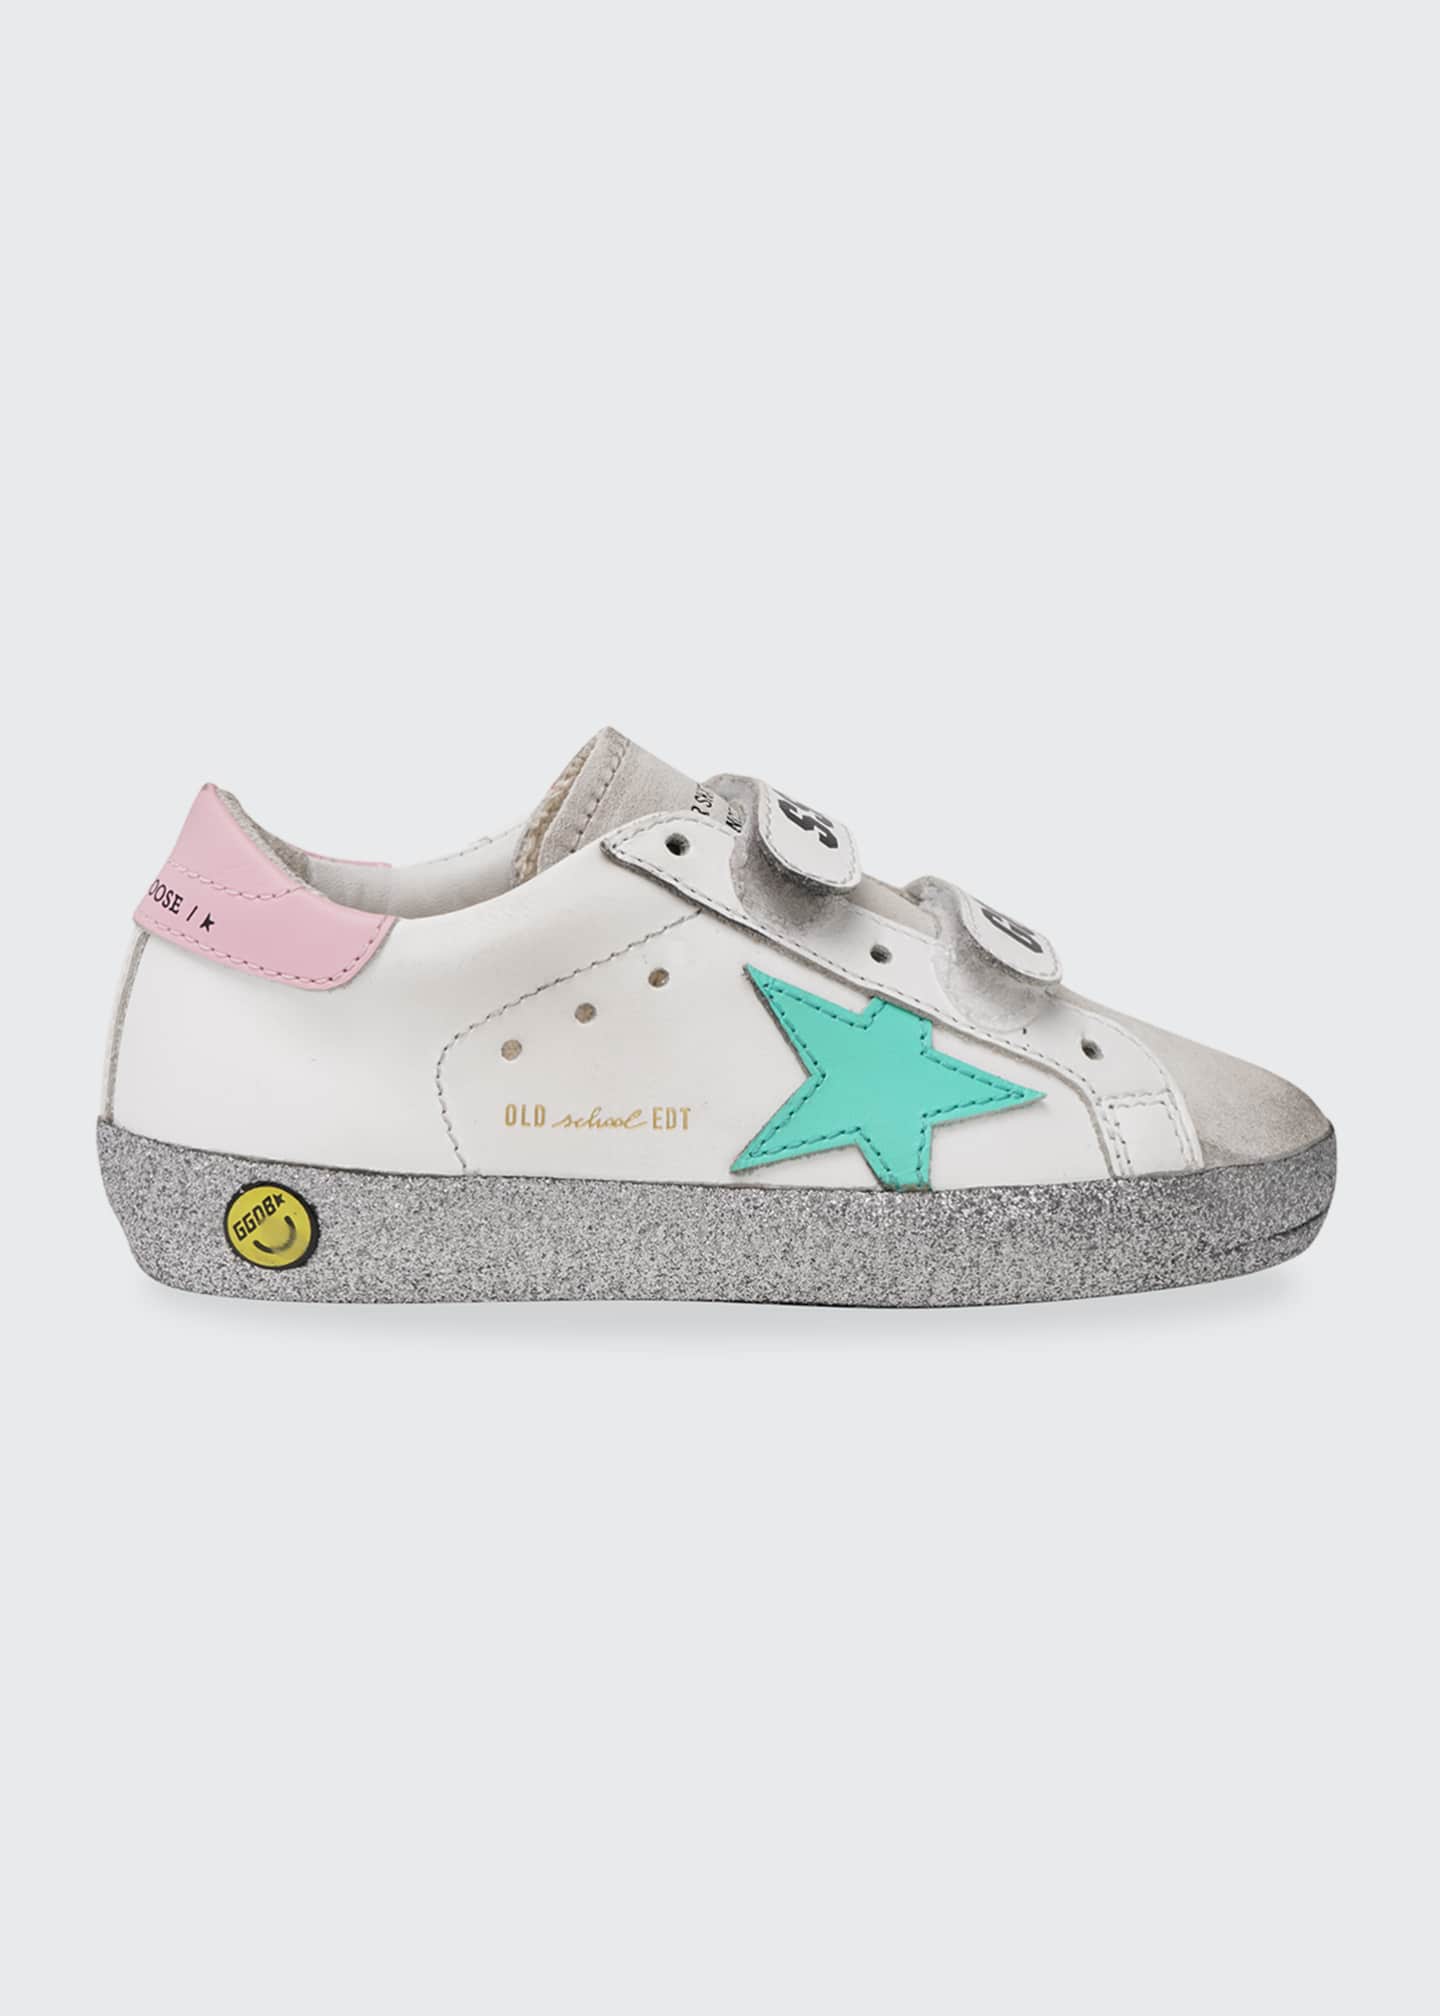 Golden Goose Old School Leather Grip-Strap Glitter-Sole Sneakers ...